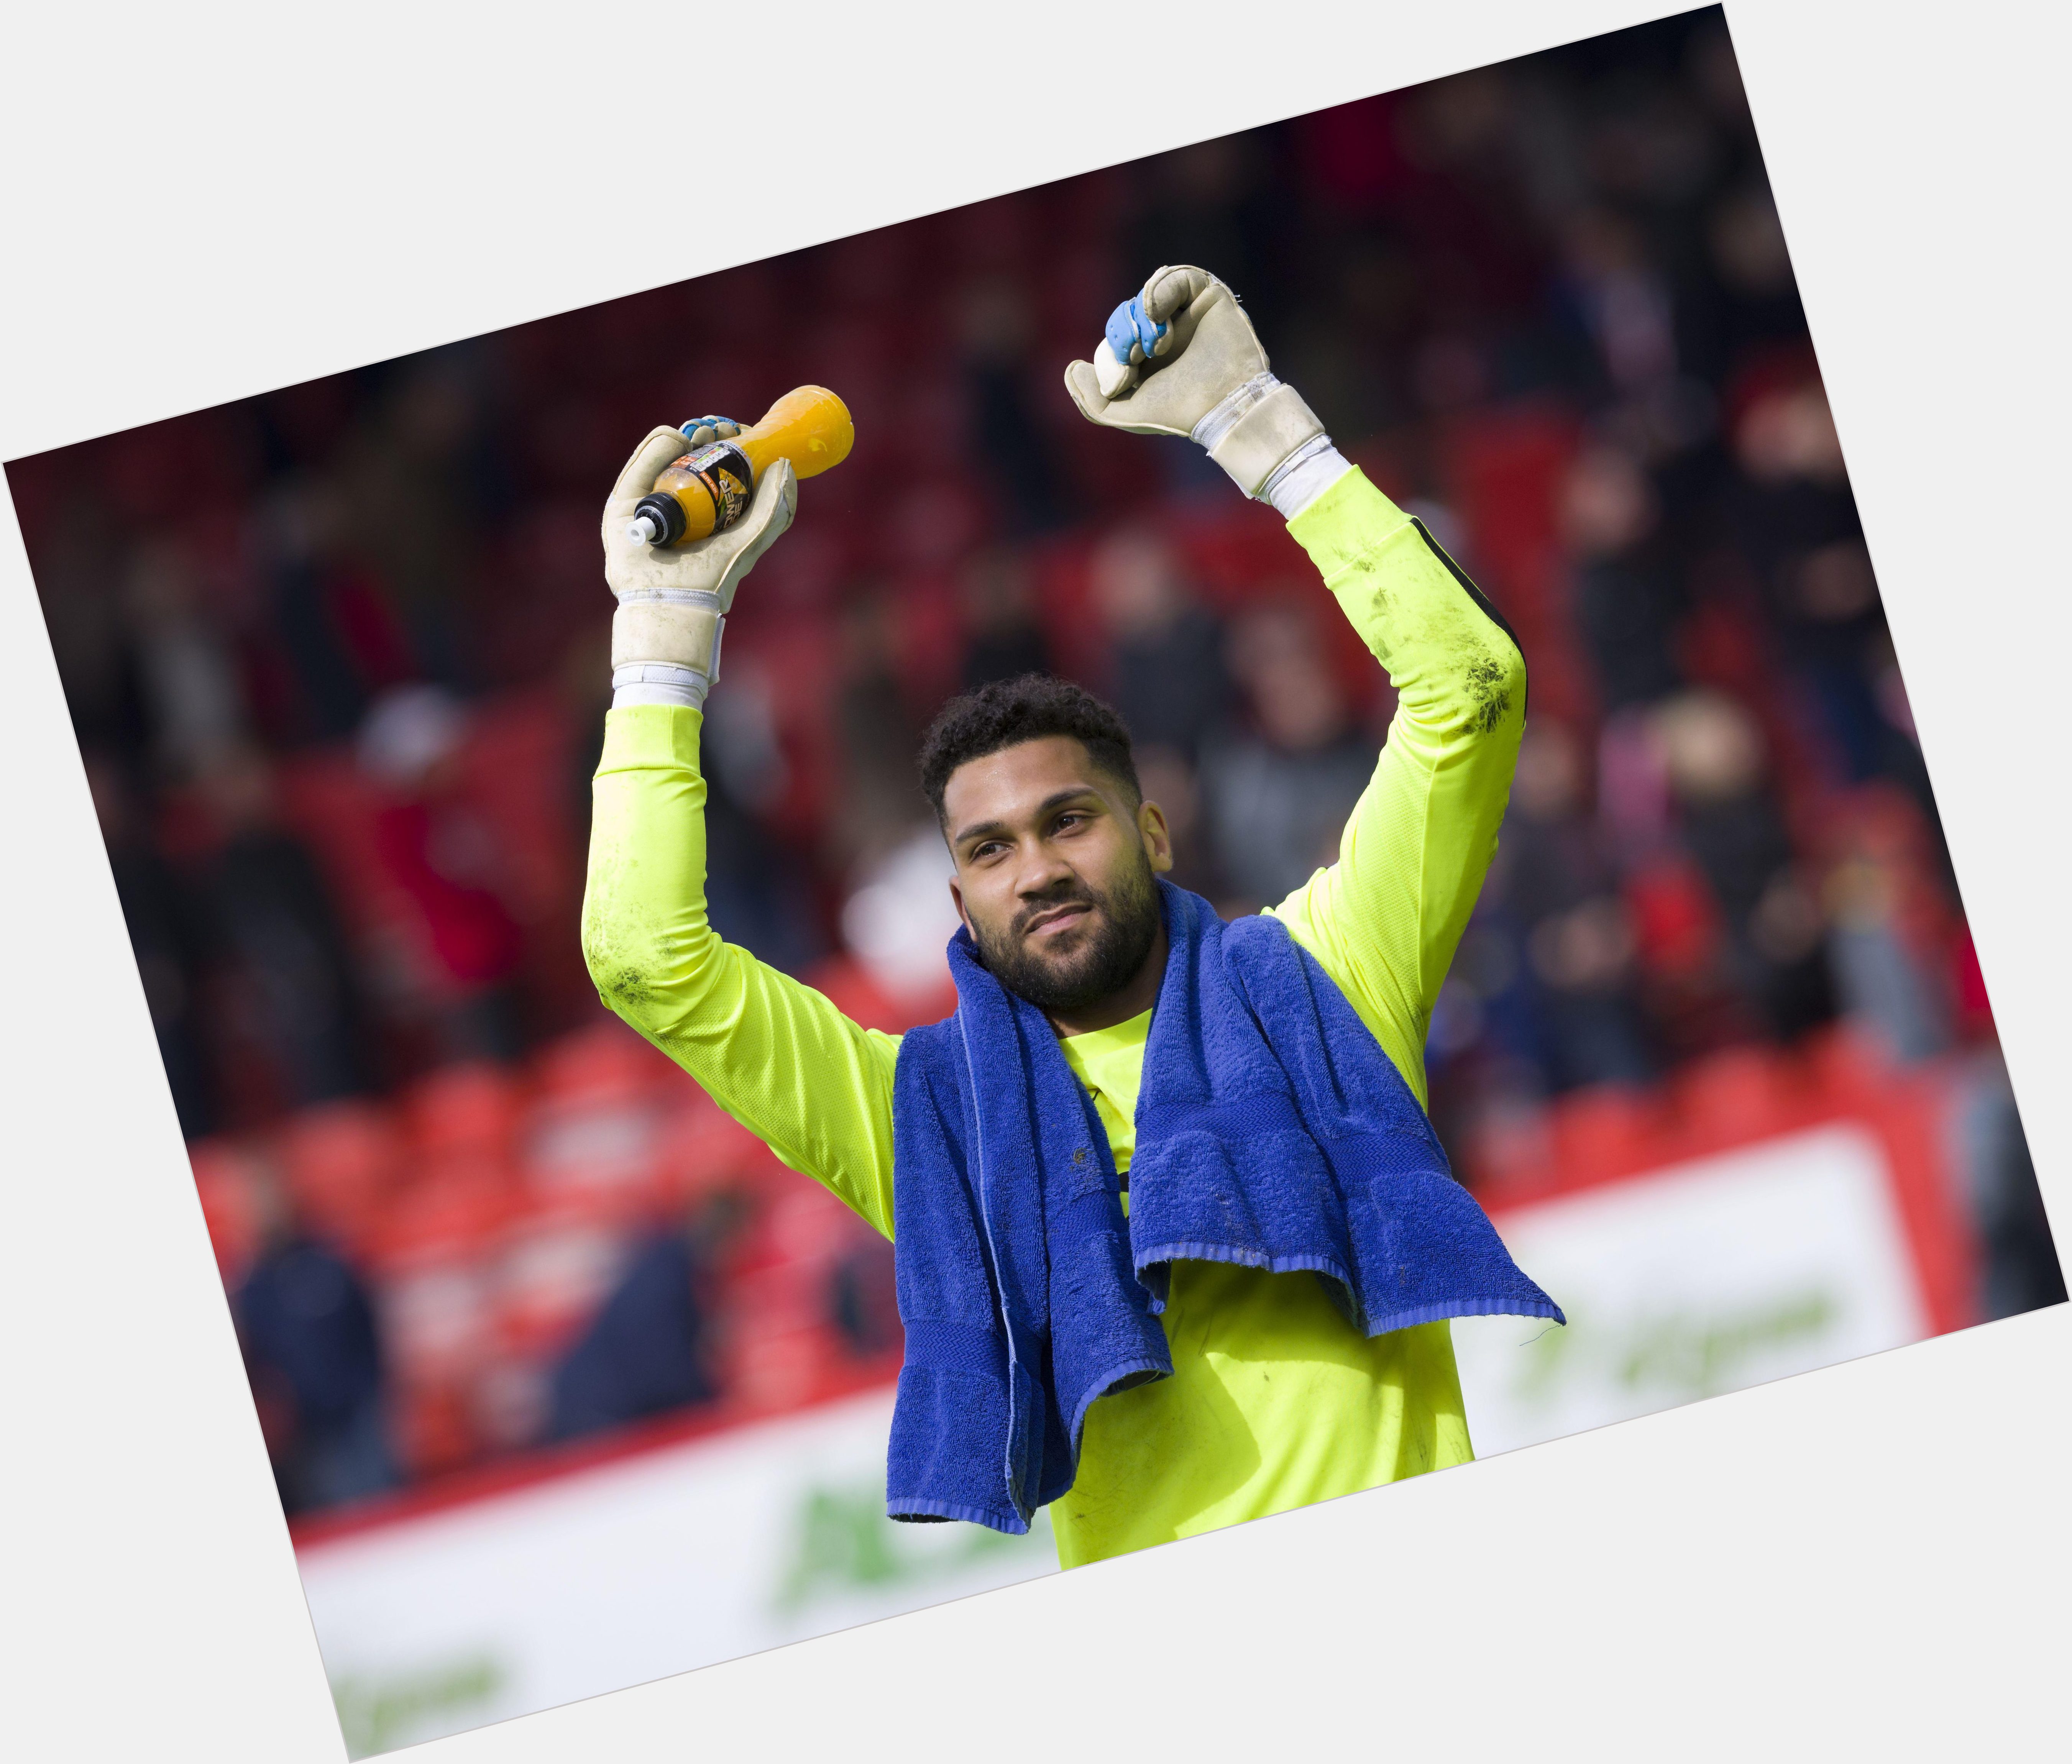 Http://fanpagepress.net/m/W/Wes Foderingham Exclusive Hot Pic 3